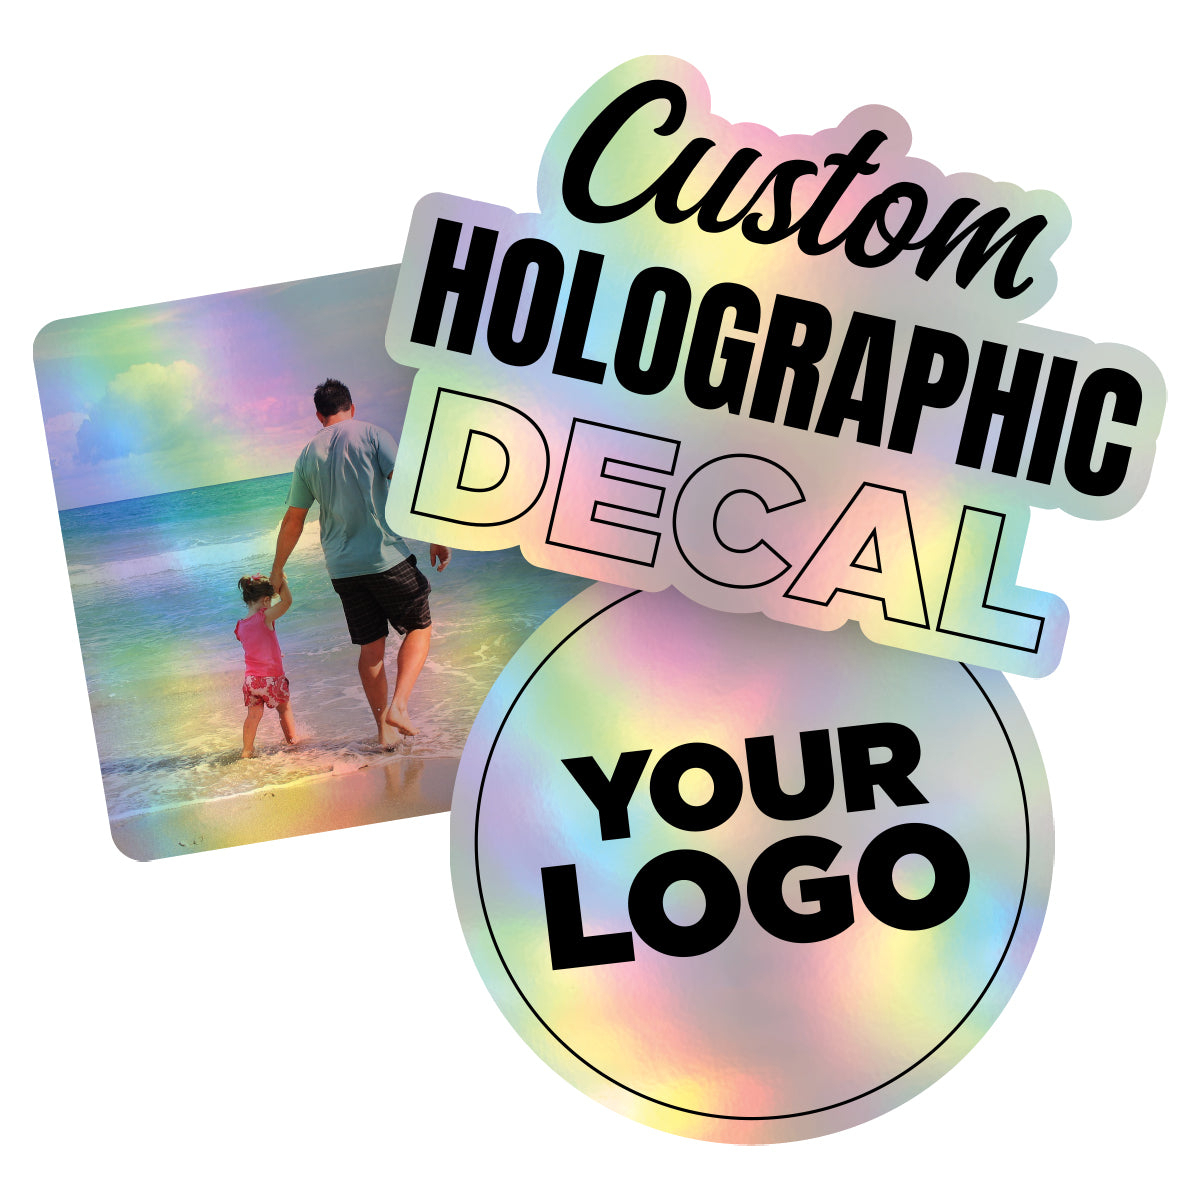 Personalized Holographic Vinyl Sticker Decal Custom Made Any Logo, Image, Text, Or Name Die Cut To Shape - 25 Pack, 8 Inch, Die Cut